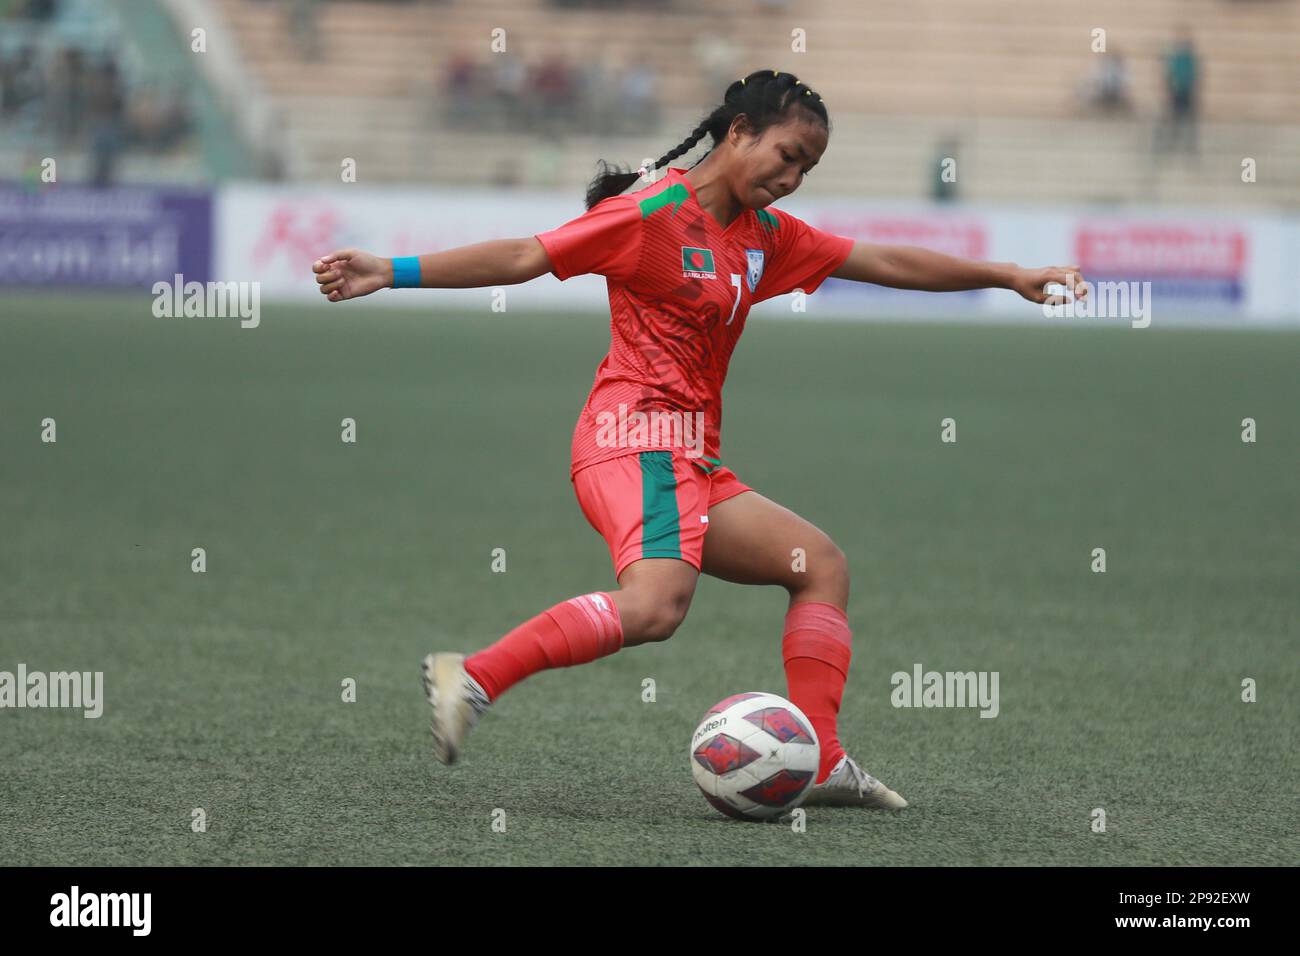 Bangladesh Under-20 Women's football team's bid to qualify for the next round of the Asian Football Confederation U-20 Women's Asia Cup Qualifiers kic Stock Photo